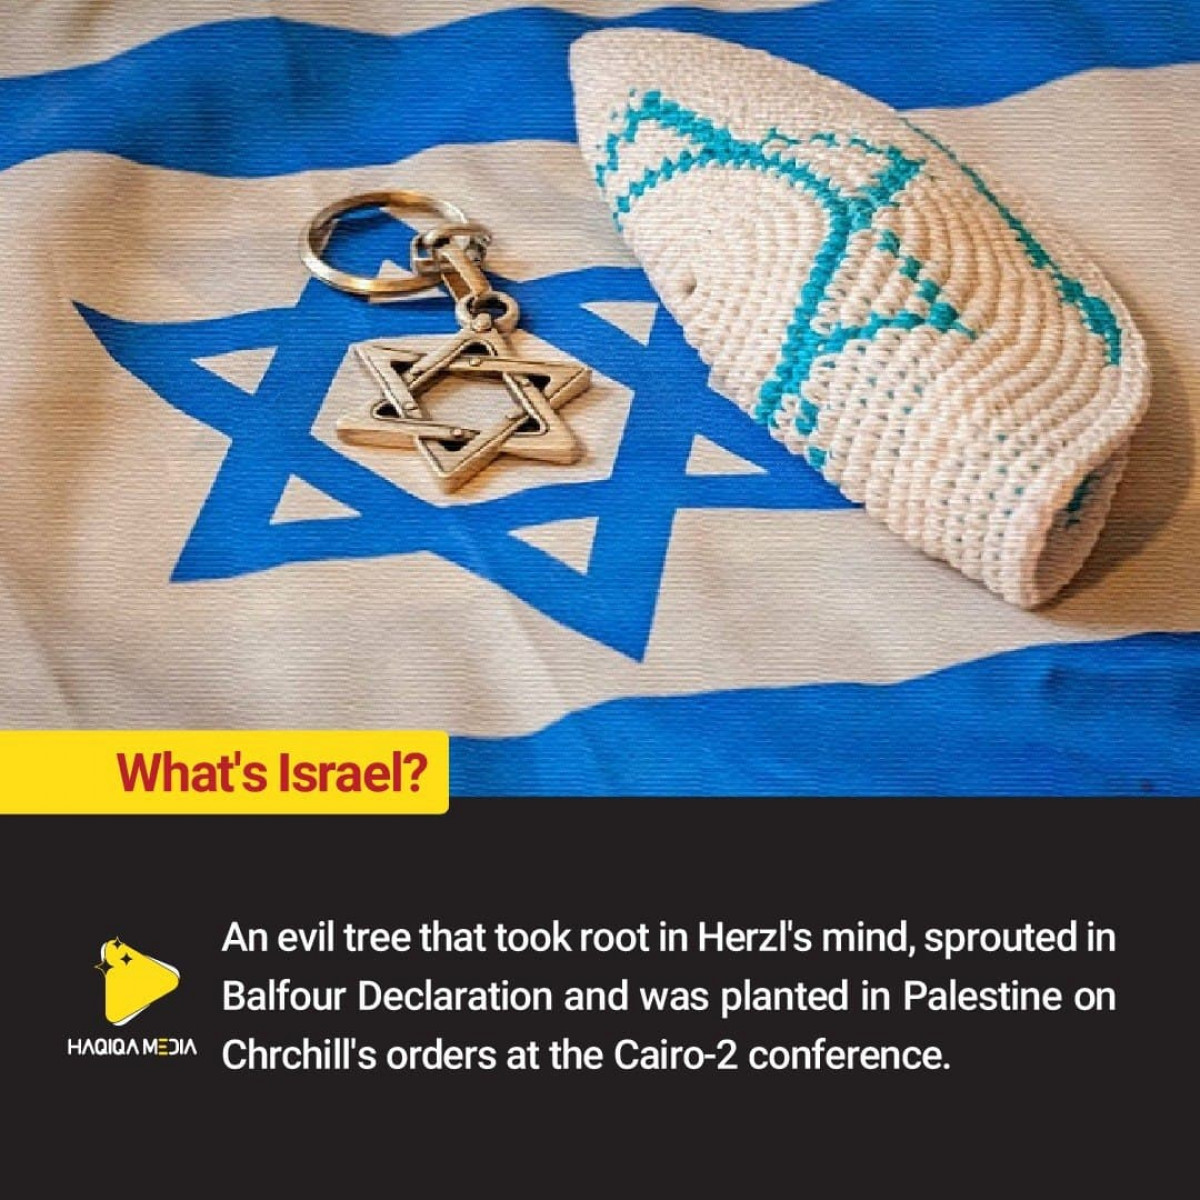 What's Israel?